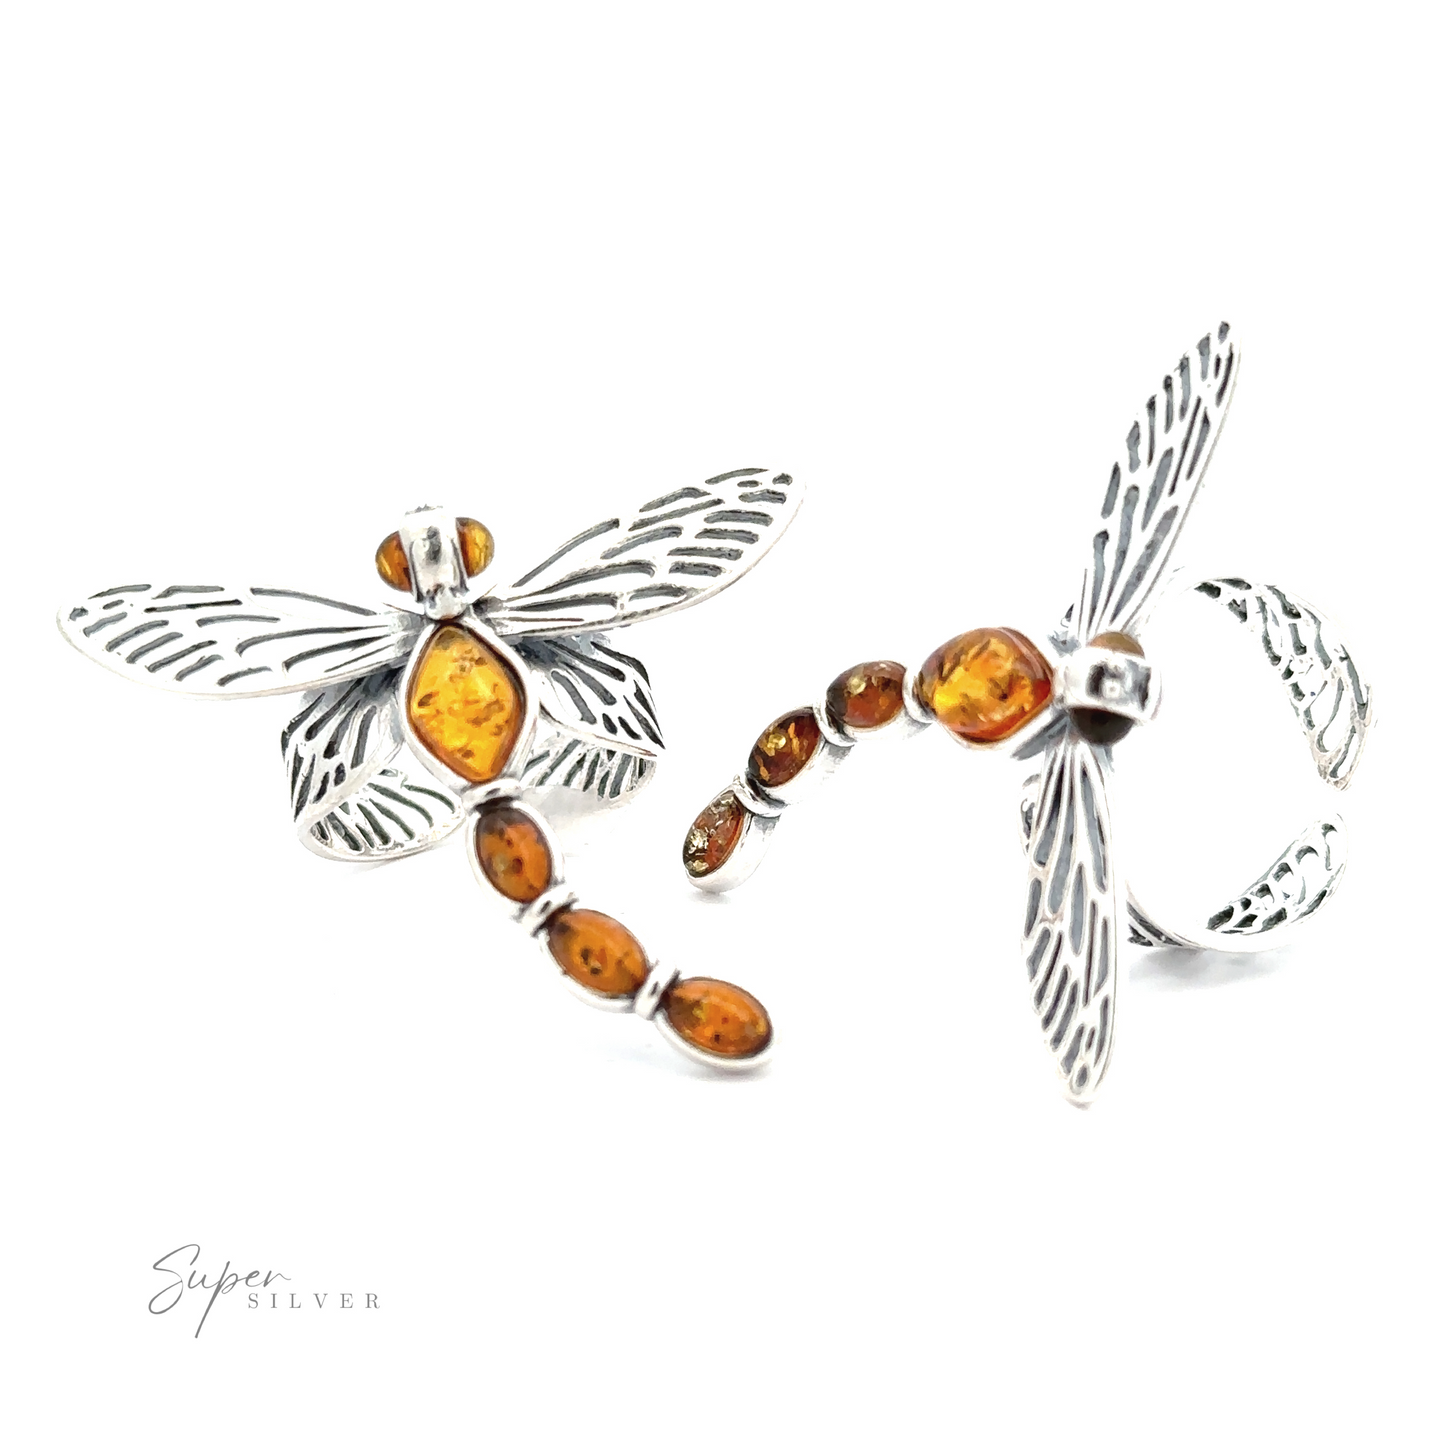 This Amber Dragonfly Adjustable Ring showcases a dragonfly-shaped silver design adorned with cognac amber stones, featuring detailed wing engravings and a segmented body. Perfect for lovers of nature-inspired jewelry.